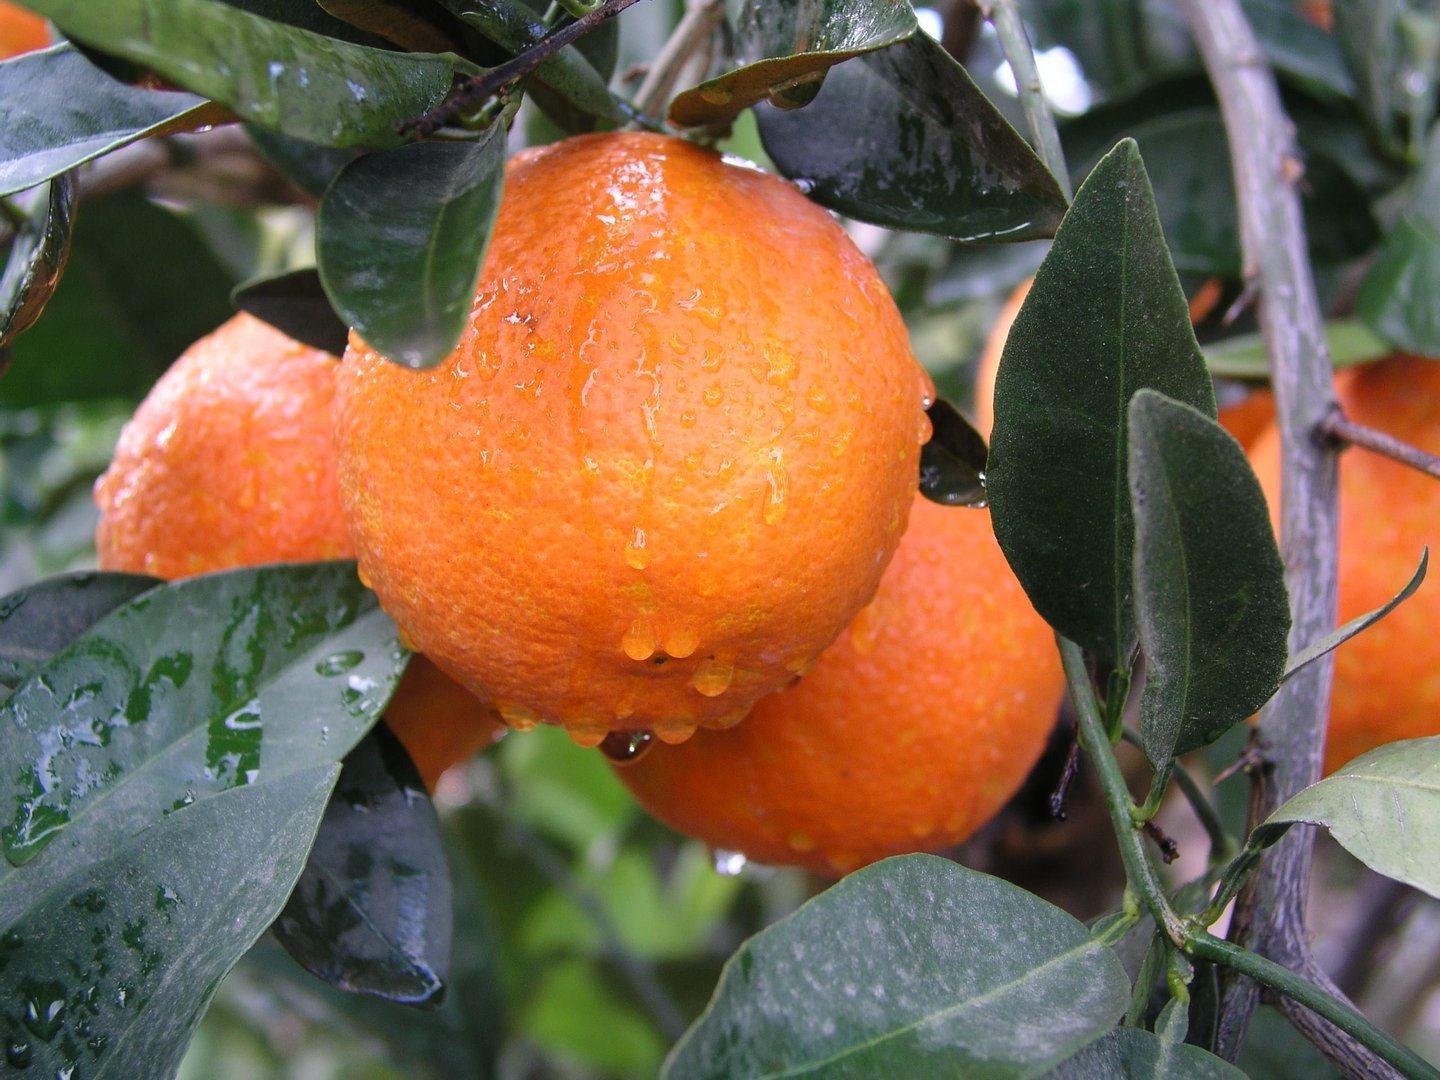 image EU approval for aid to citrus producers